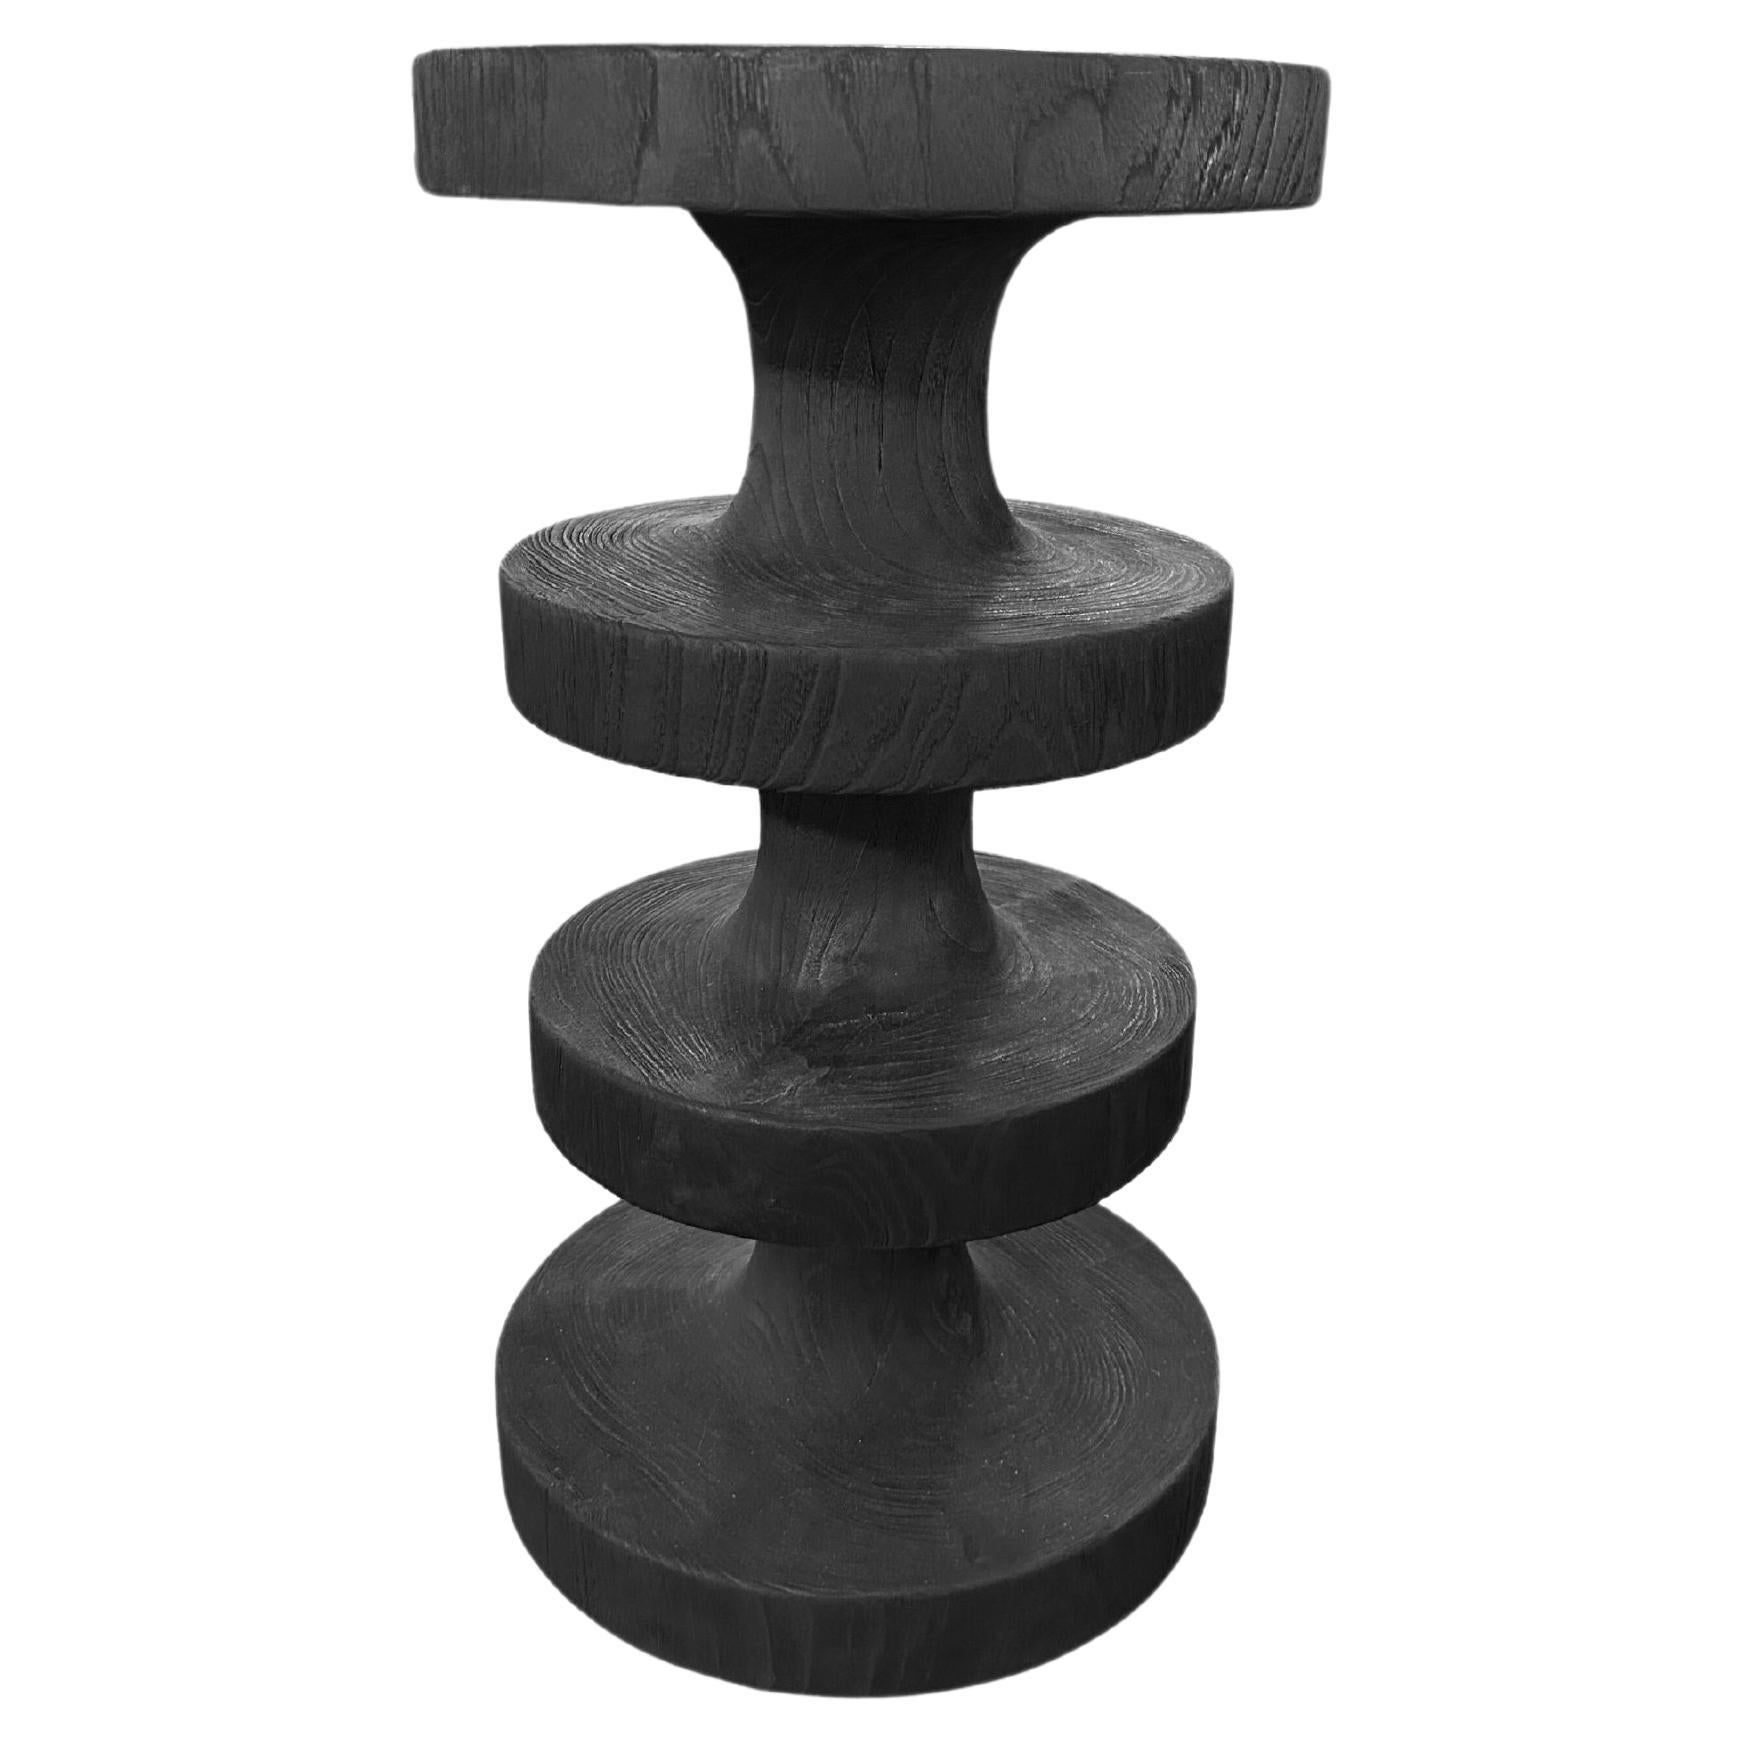 Sculptural Stool Carved from Solid Teak Wood, Burnt Finish Modern Organic